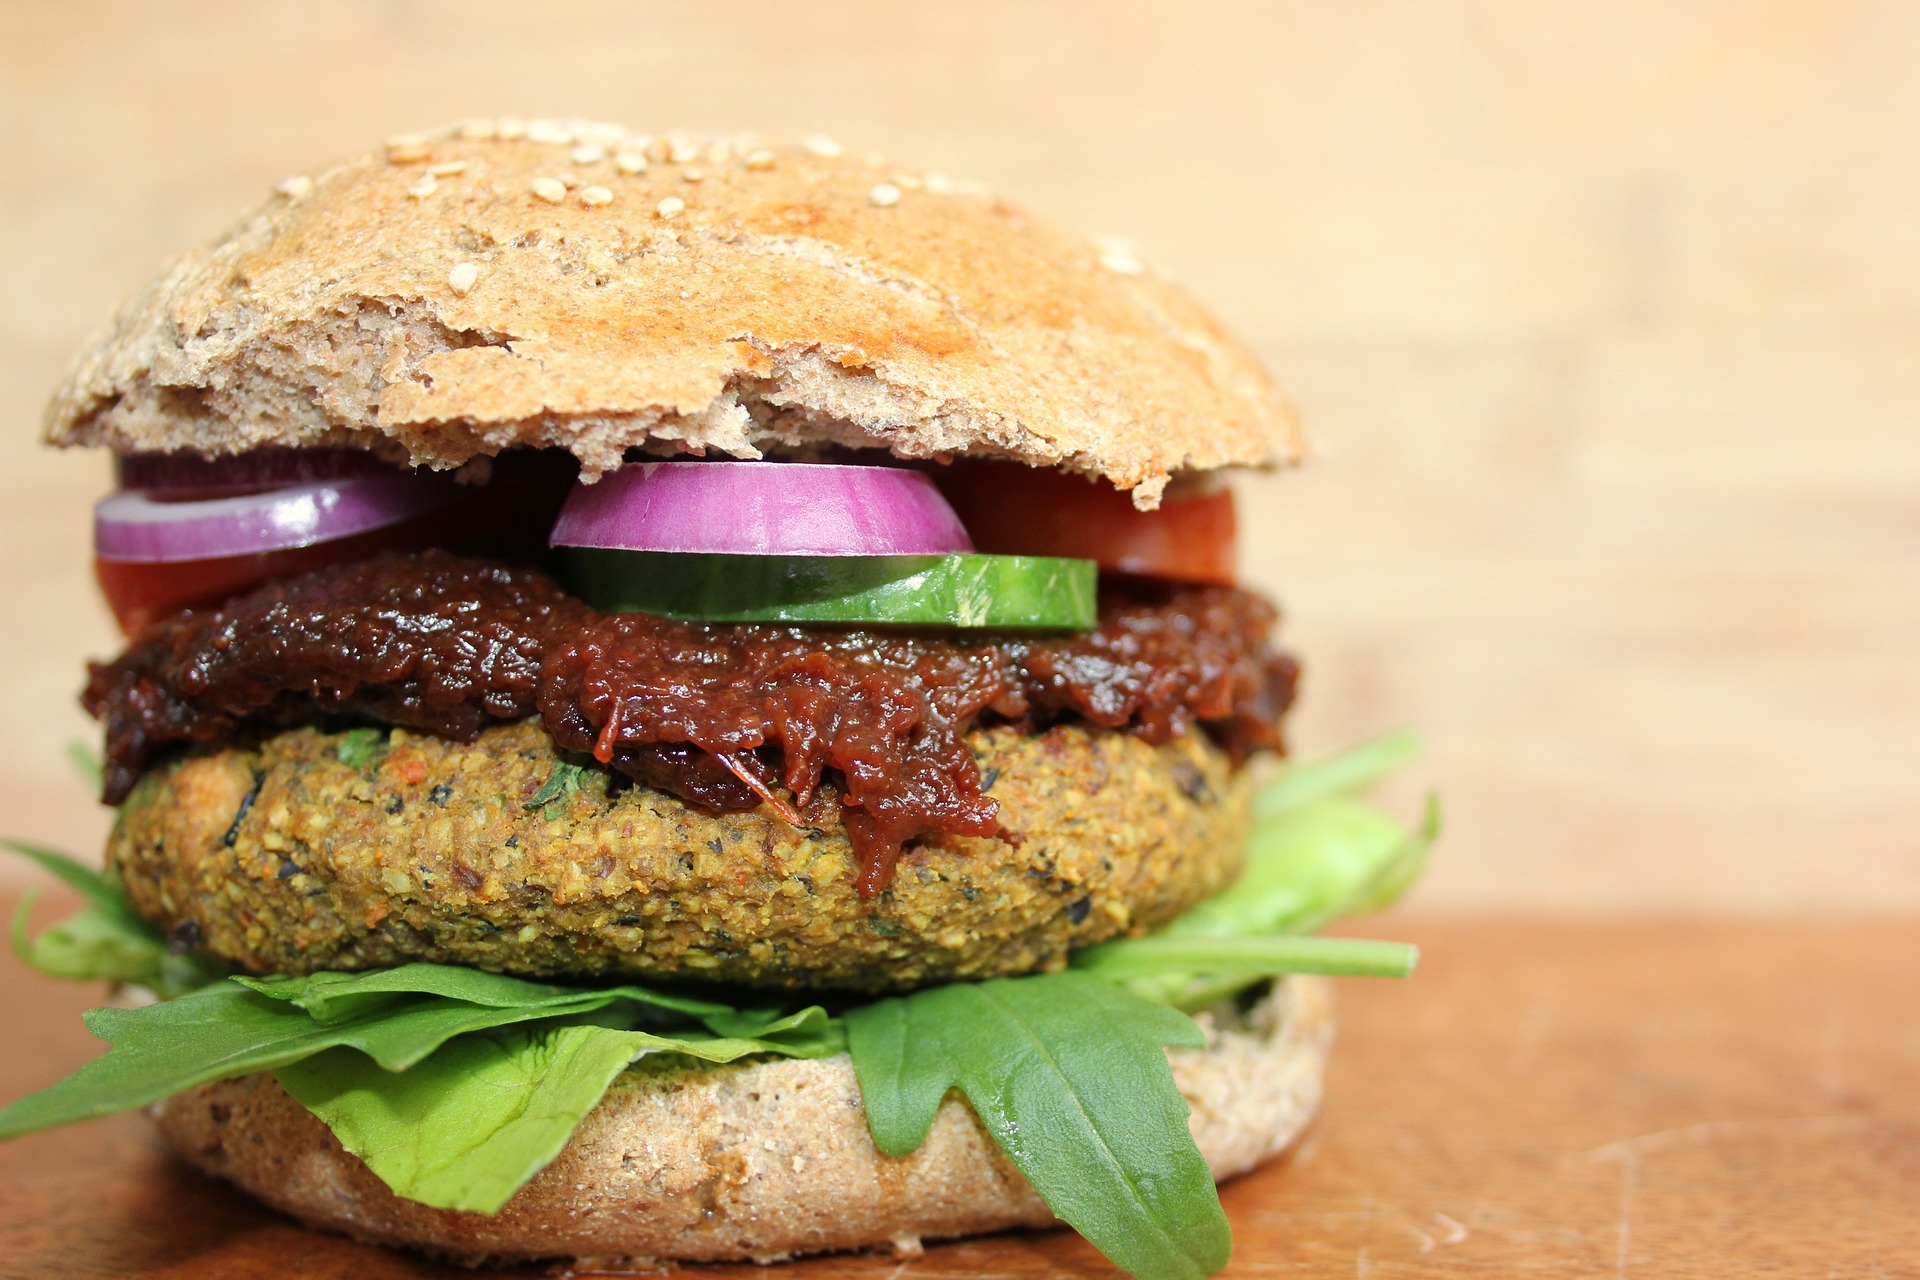 What is the future of meat? Plant-based meat alternatives